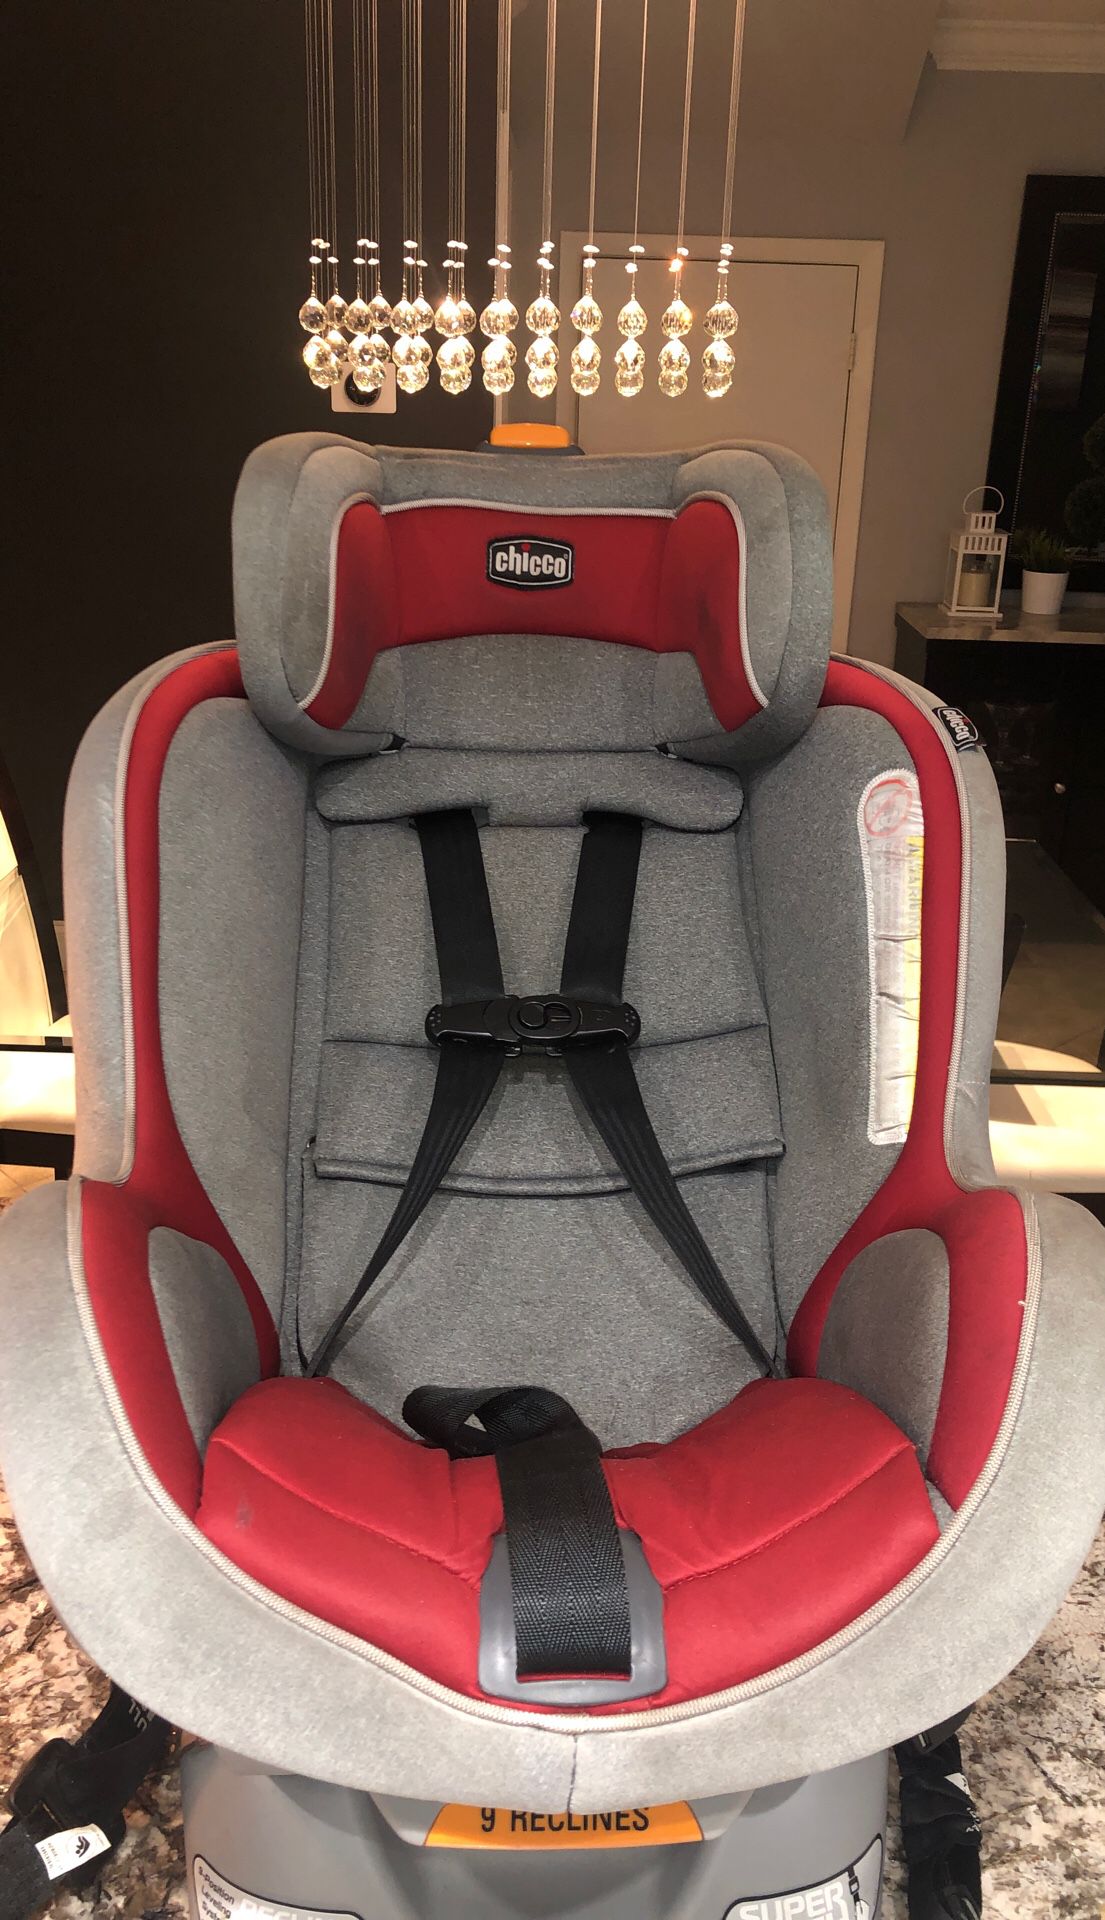 Chicco NextFit Car Seat - 9 recliners position